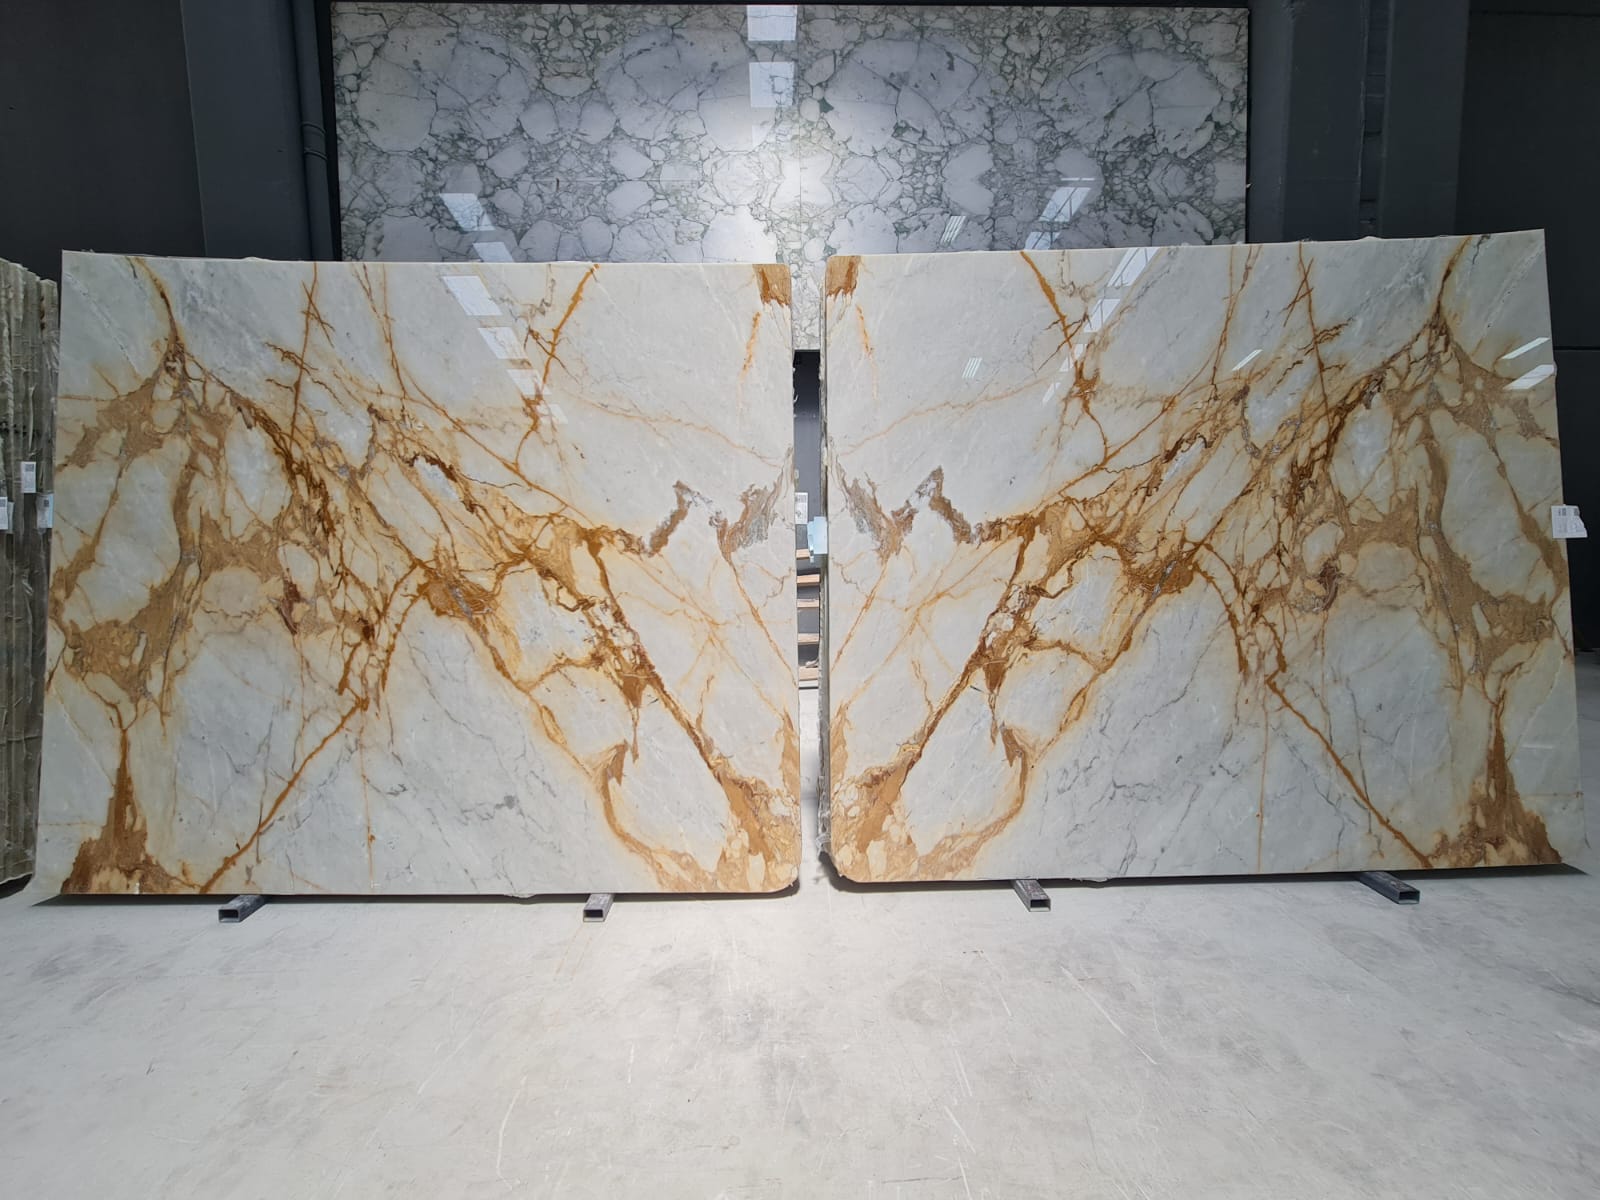 Calacatta Giallo Polished Marble Slabs - Emperor Marble